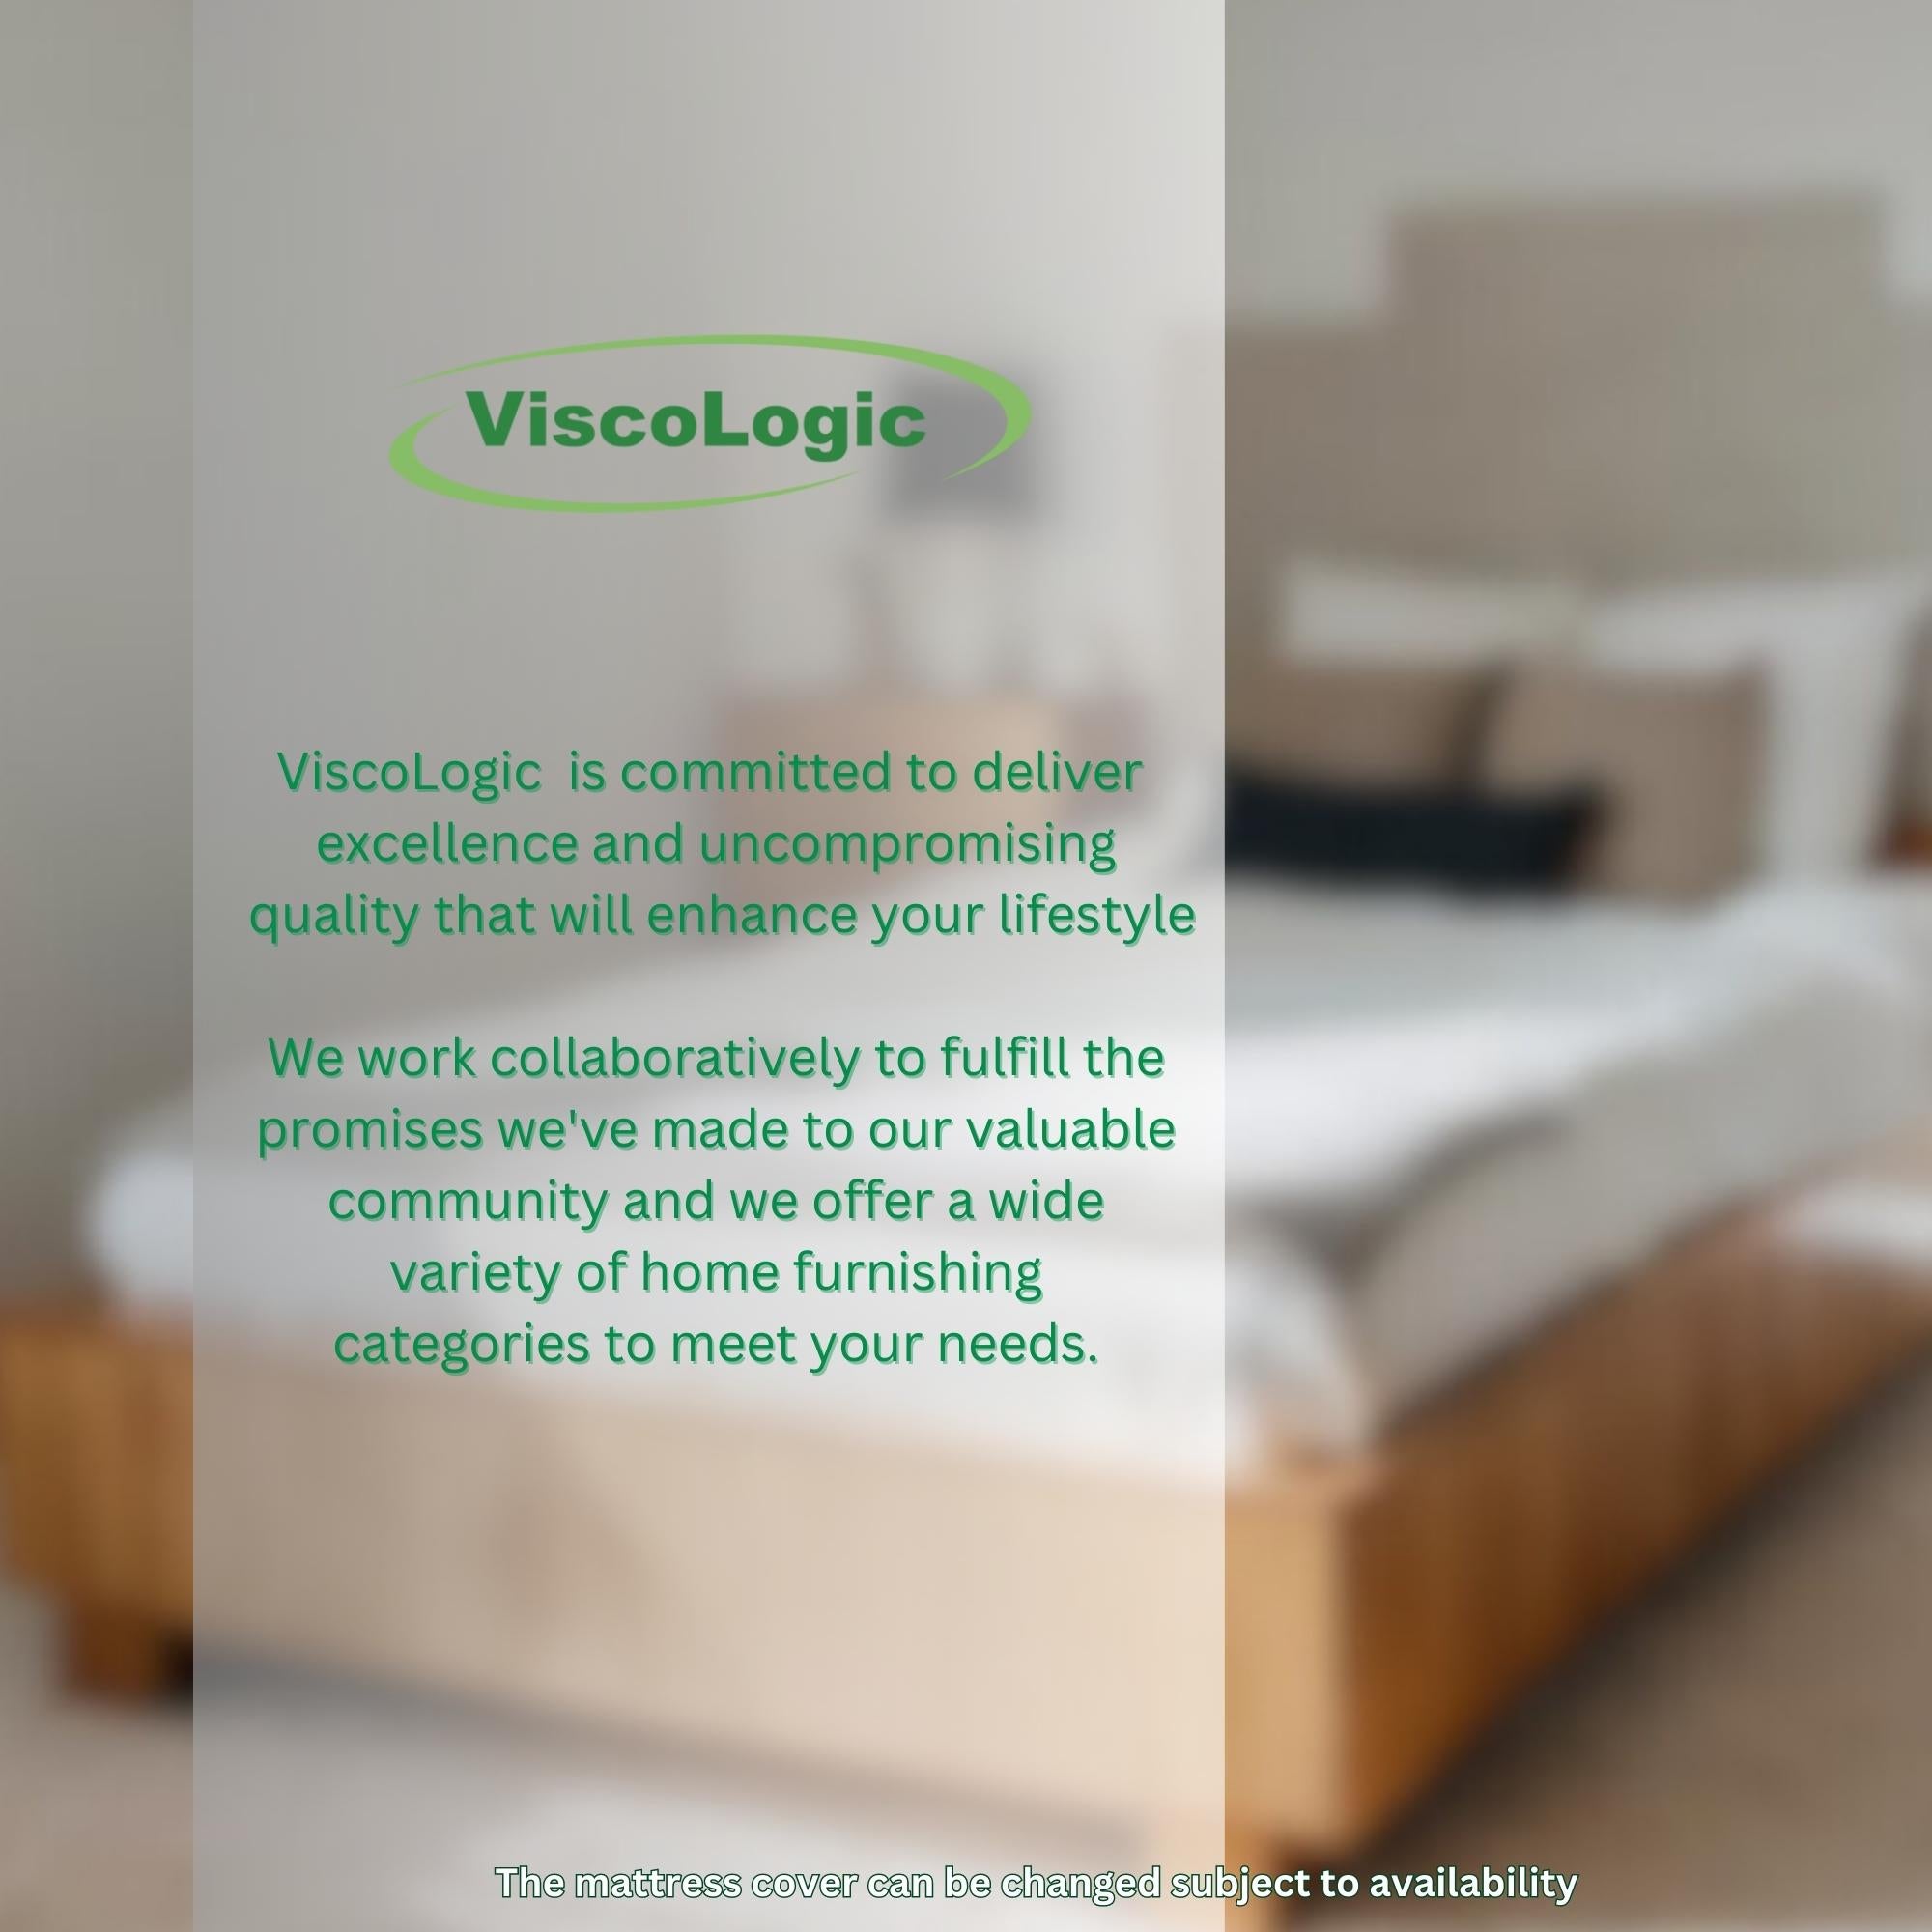 ViscoLogic Elite Memory Foam Mattress with Soft Bamboo Feel Cover, Pressure Relieving Comfort, CertiPUR-US® Certified Foam